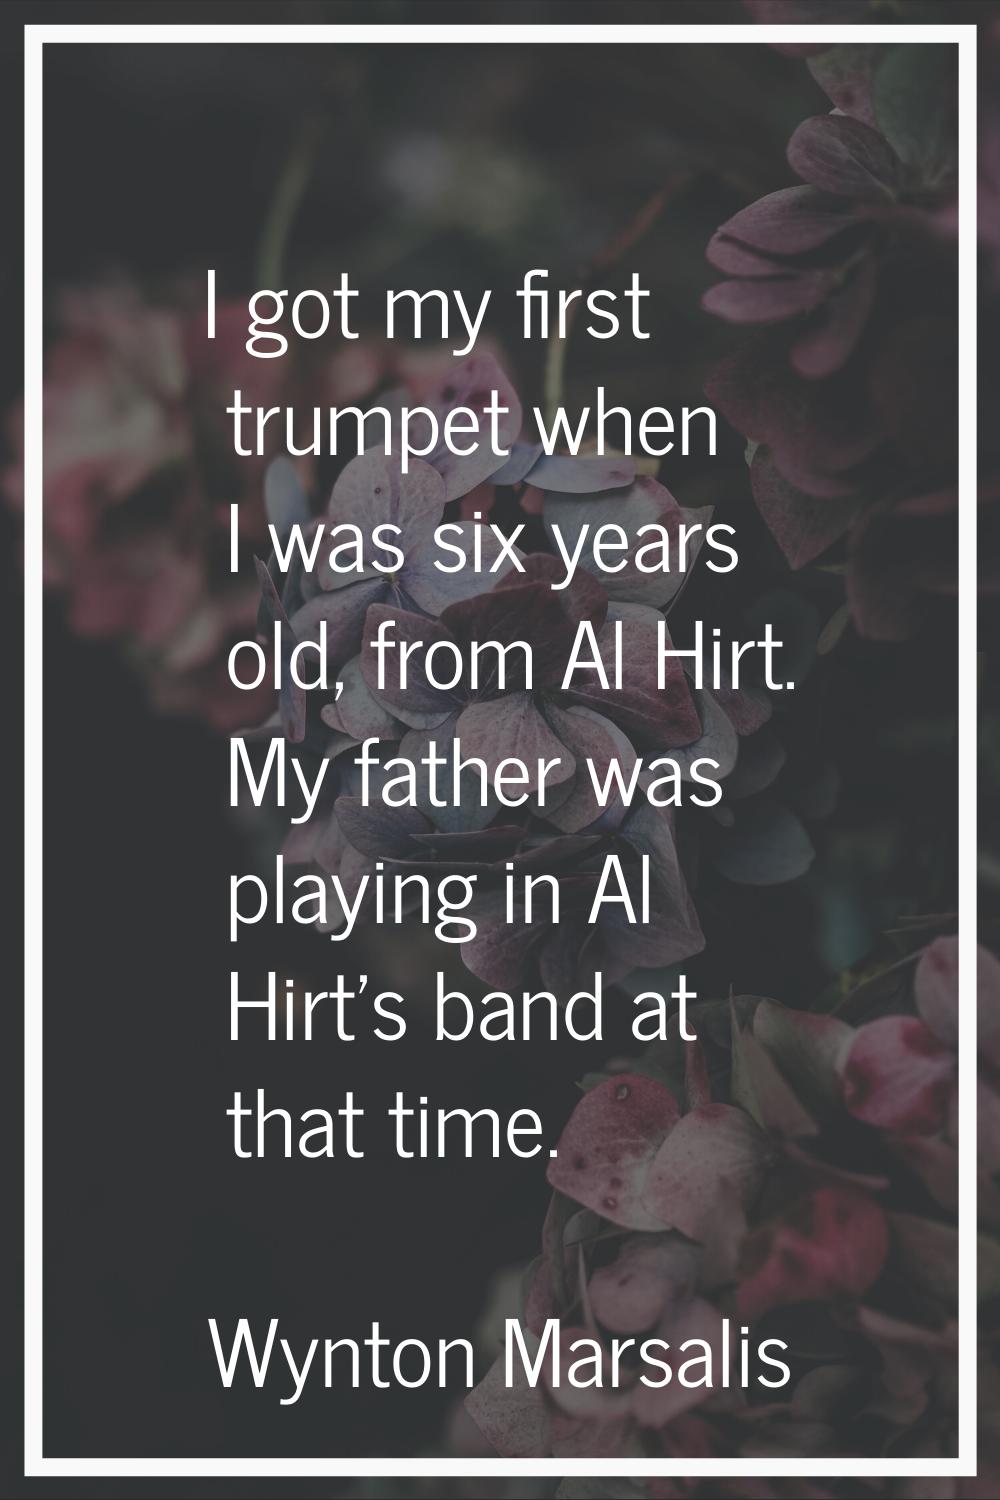 I got my first trumpet when I was six years old, from Al Hirt. My father was playing in Al Hirt's b